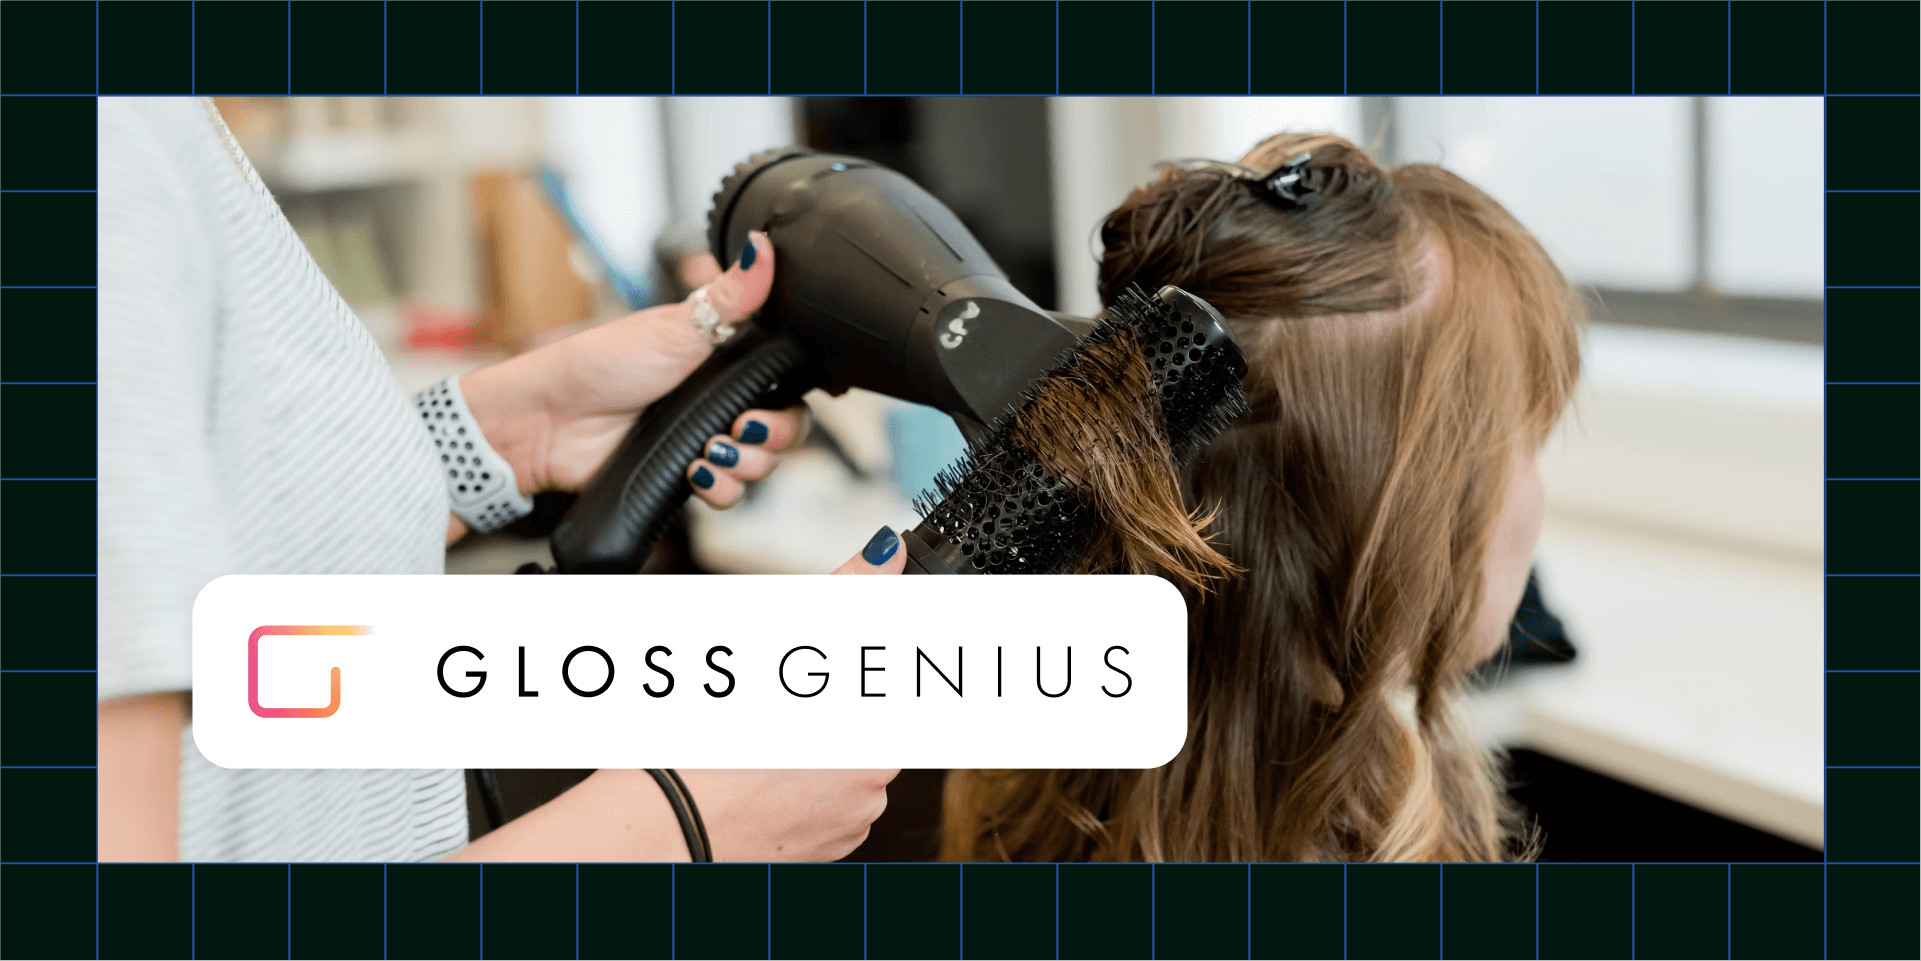 GlossGenius uses Fivetran to spread data access and spur growth